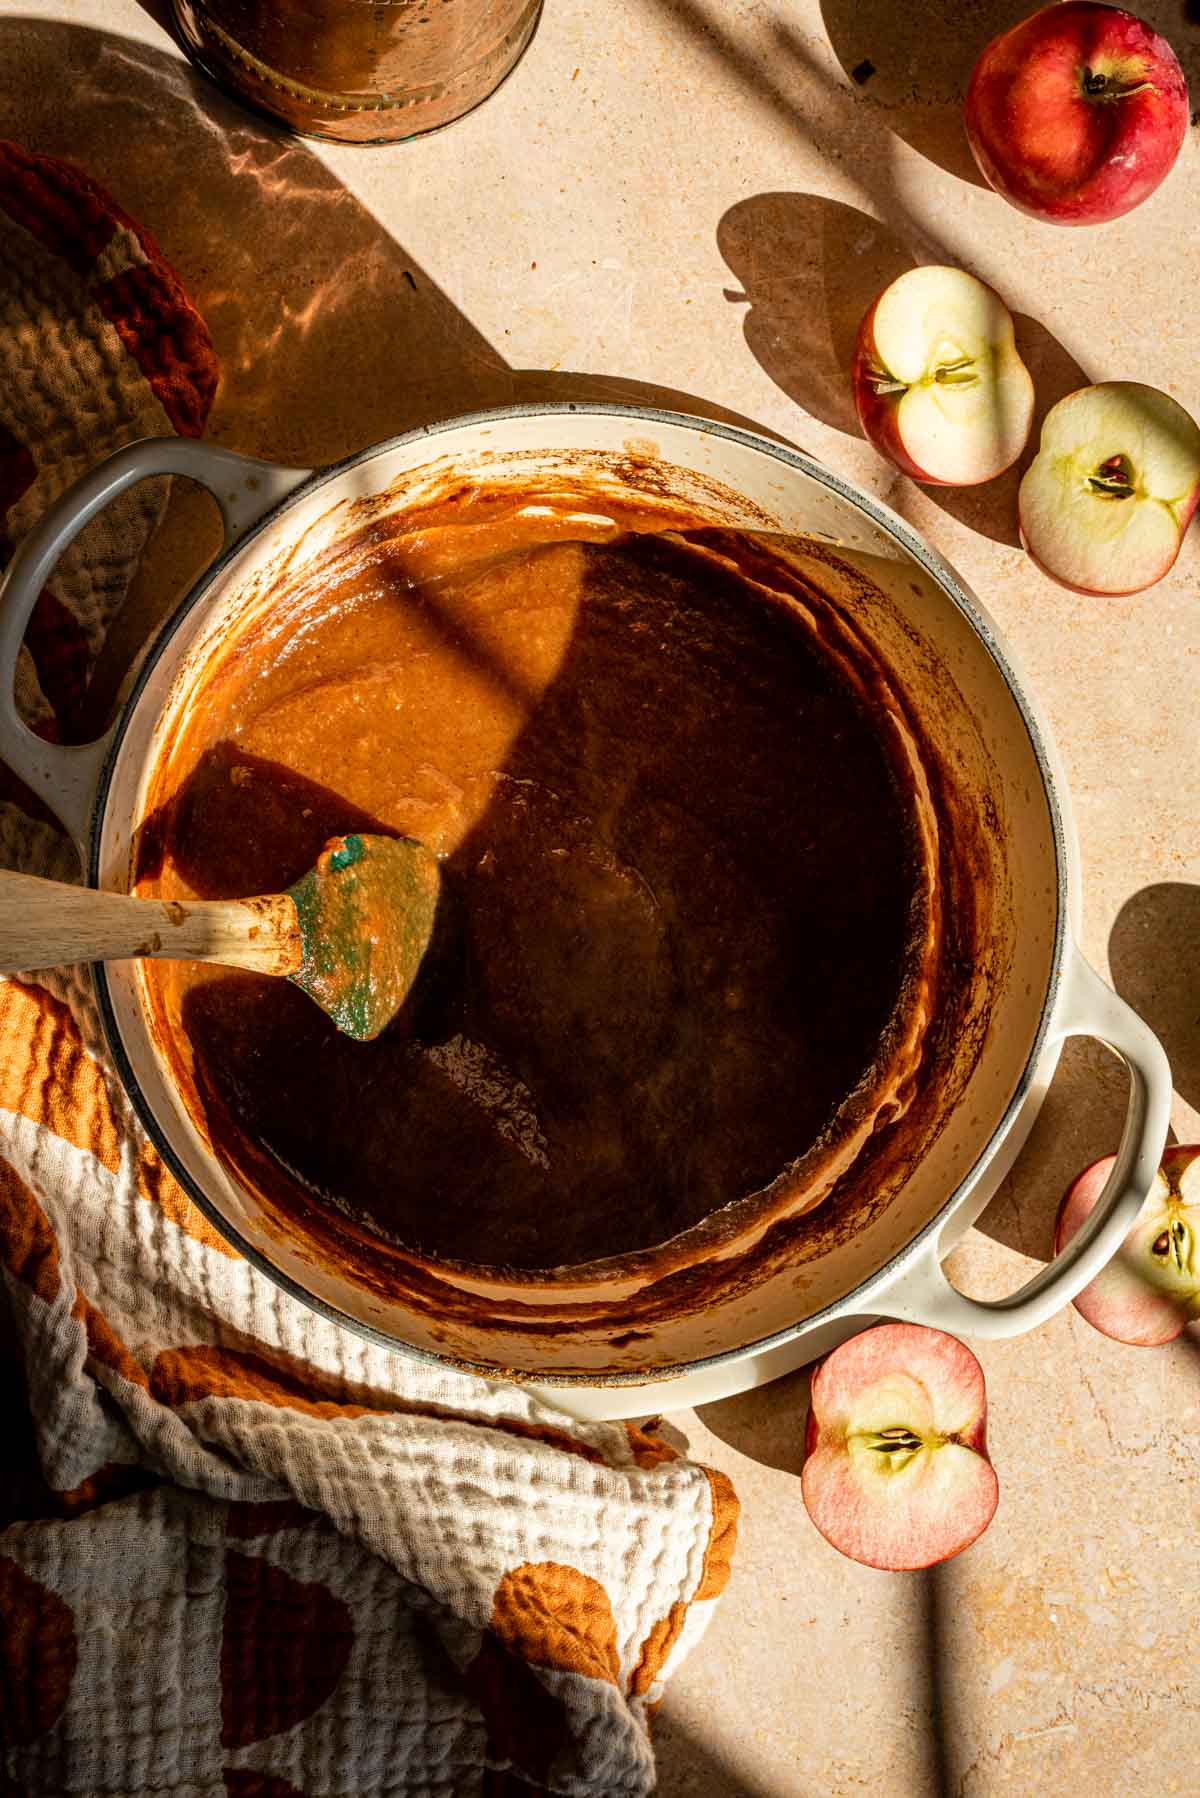 The cooked down apples in the dutch oven with a green spatula and apple slices off to the side.